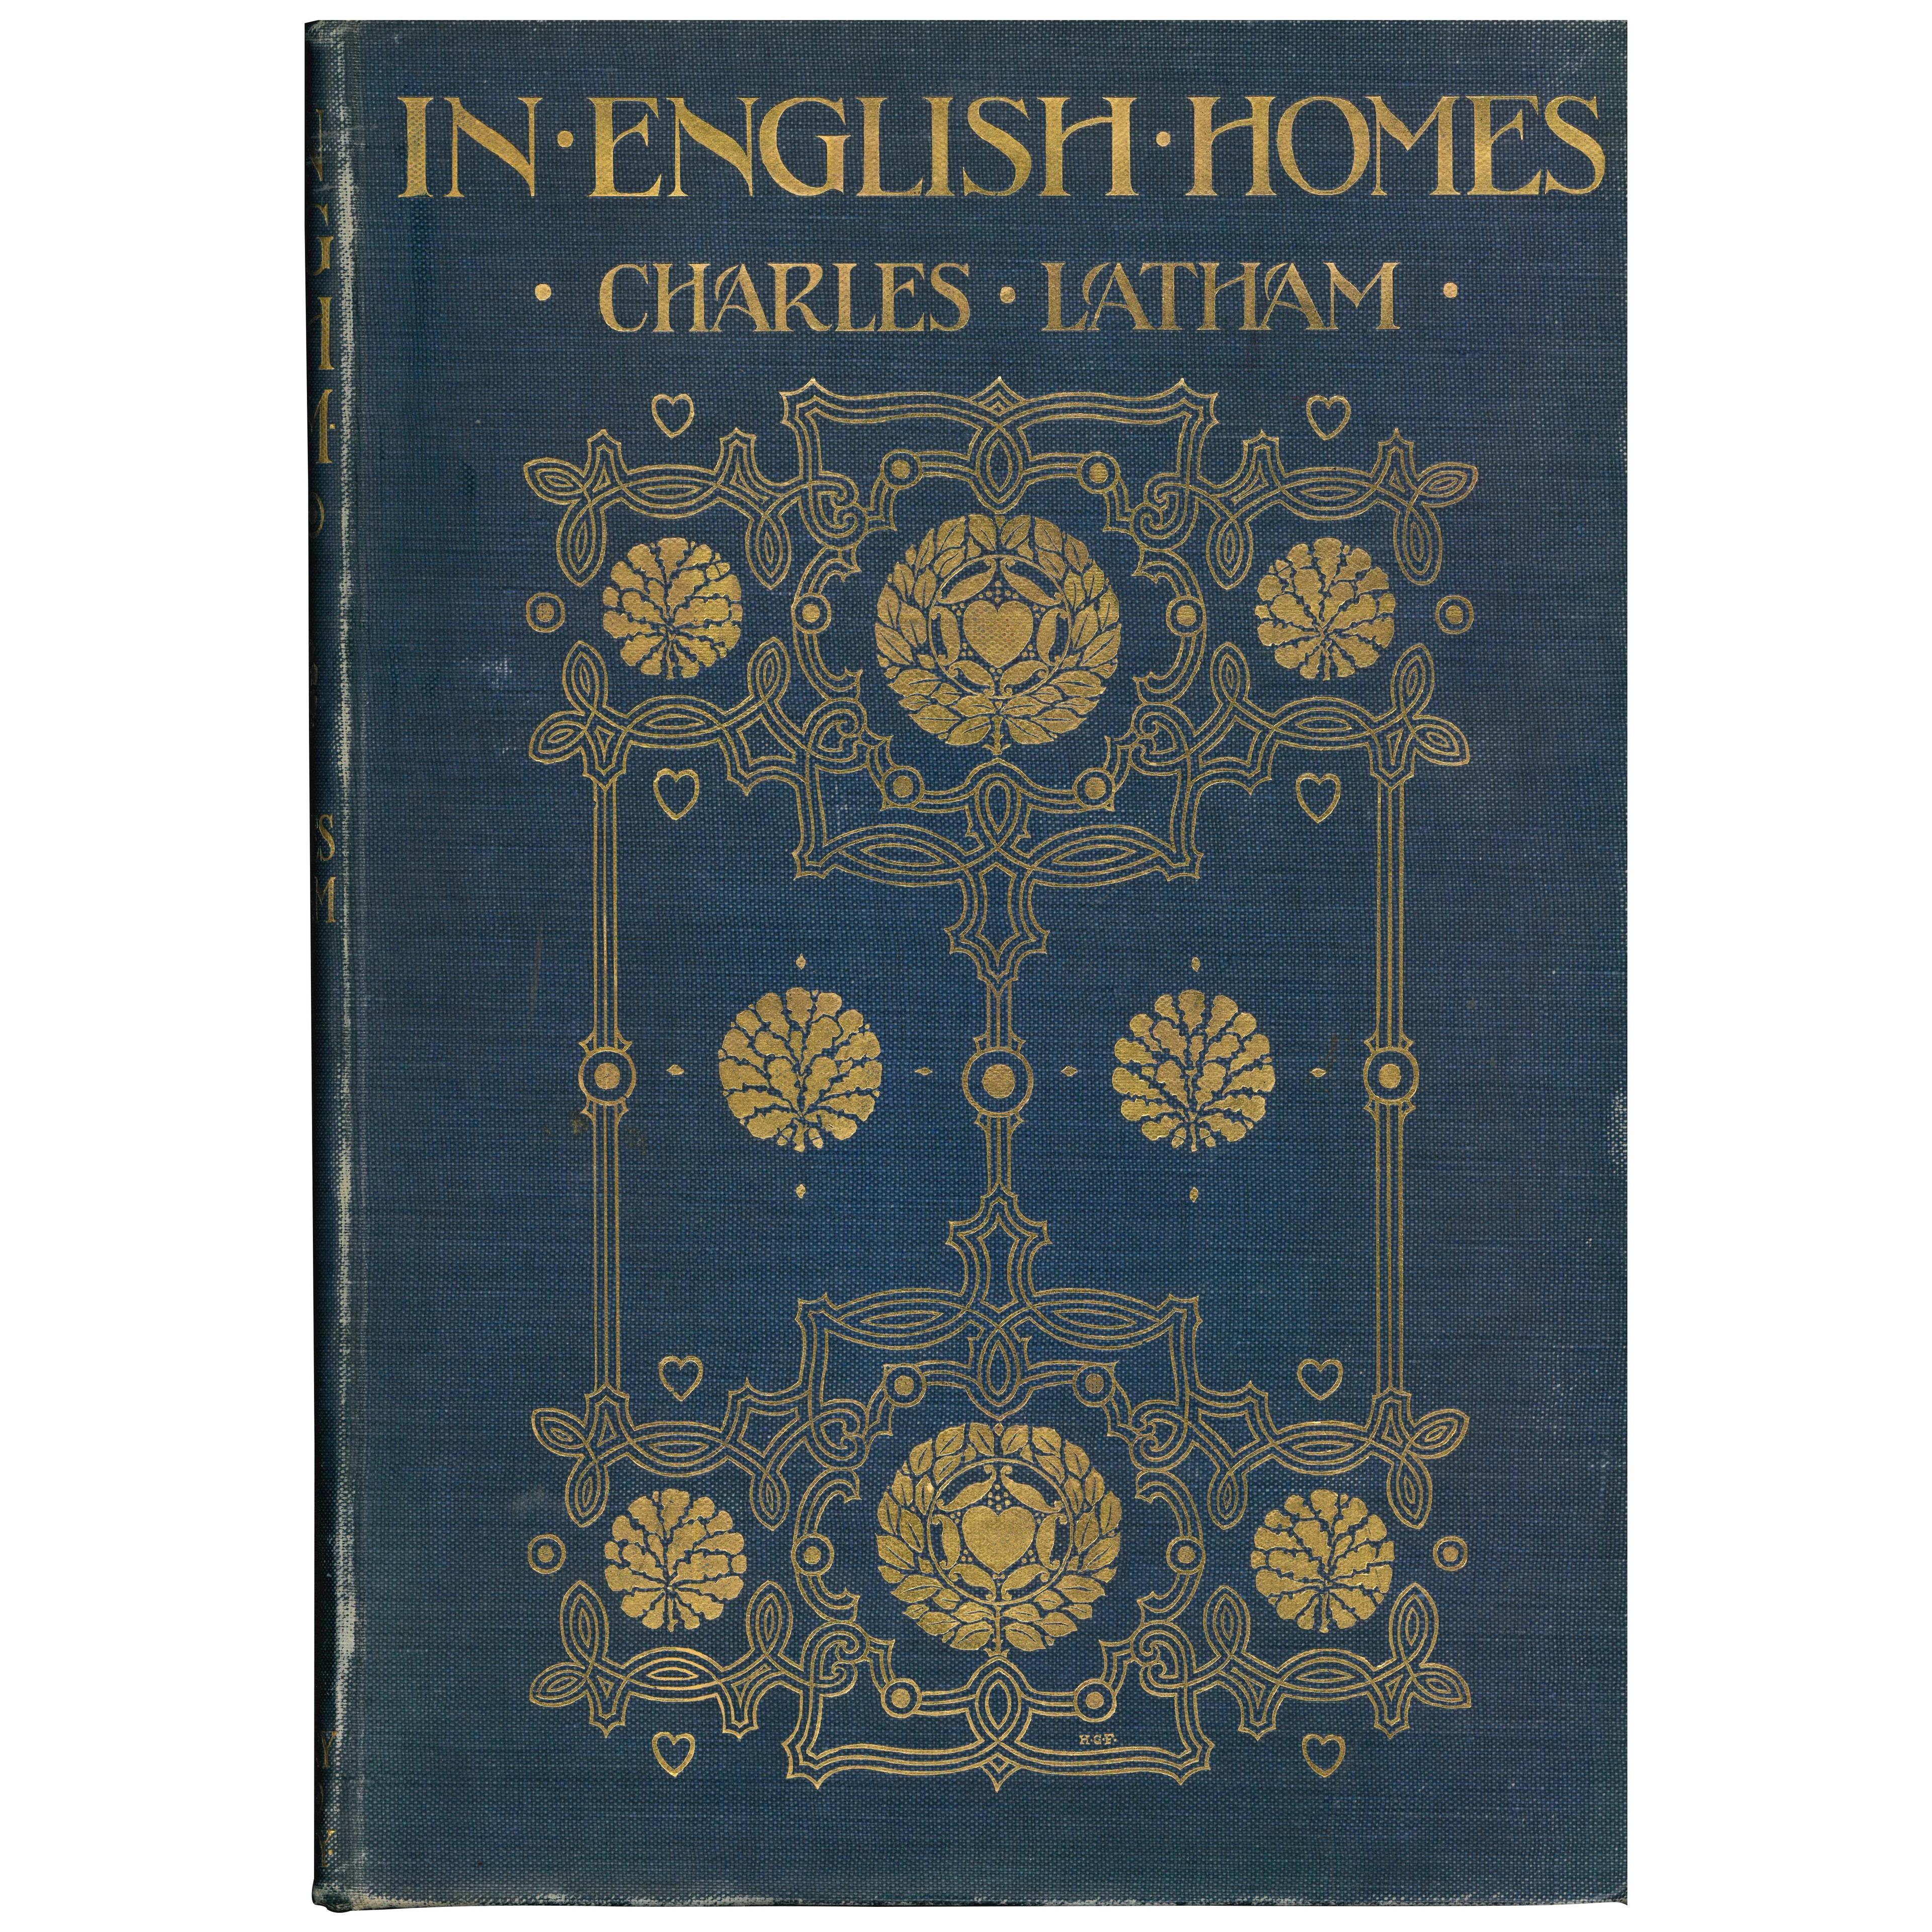 IN ENGLISH HOMES - Set of 3 Books by Charles Latham